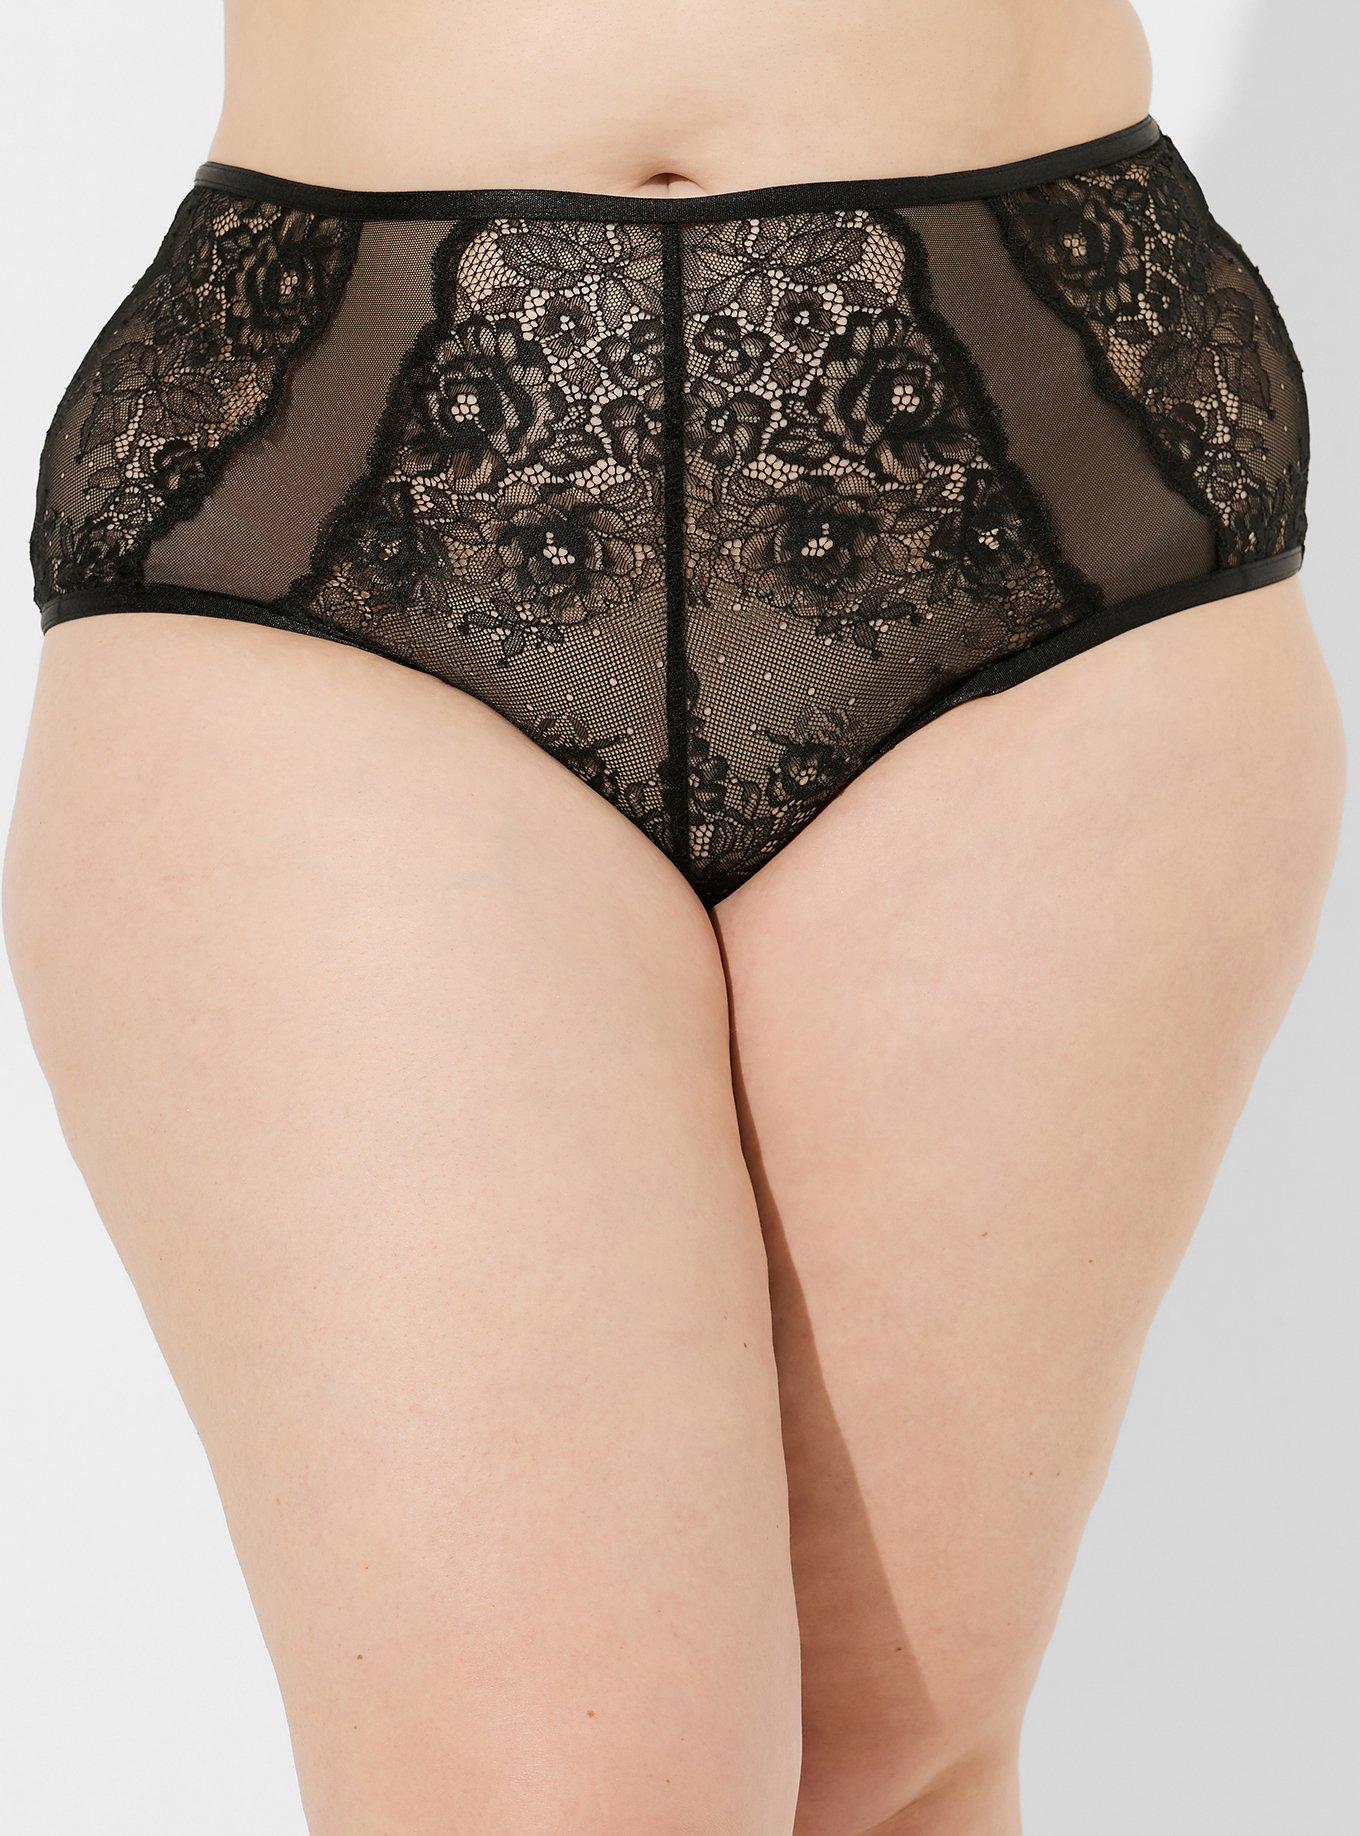 torrid, Intimates & Sleepwear, Torrid Lace Mid Rise Cheeky Panty With  Open Bum Size 2 Nwt